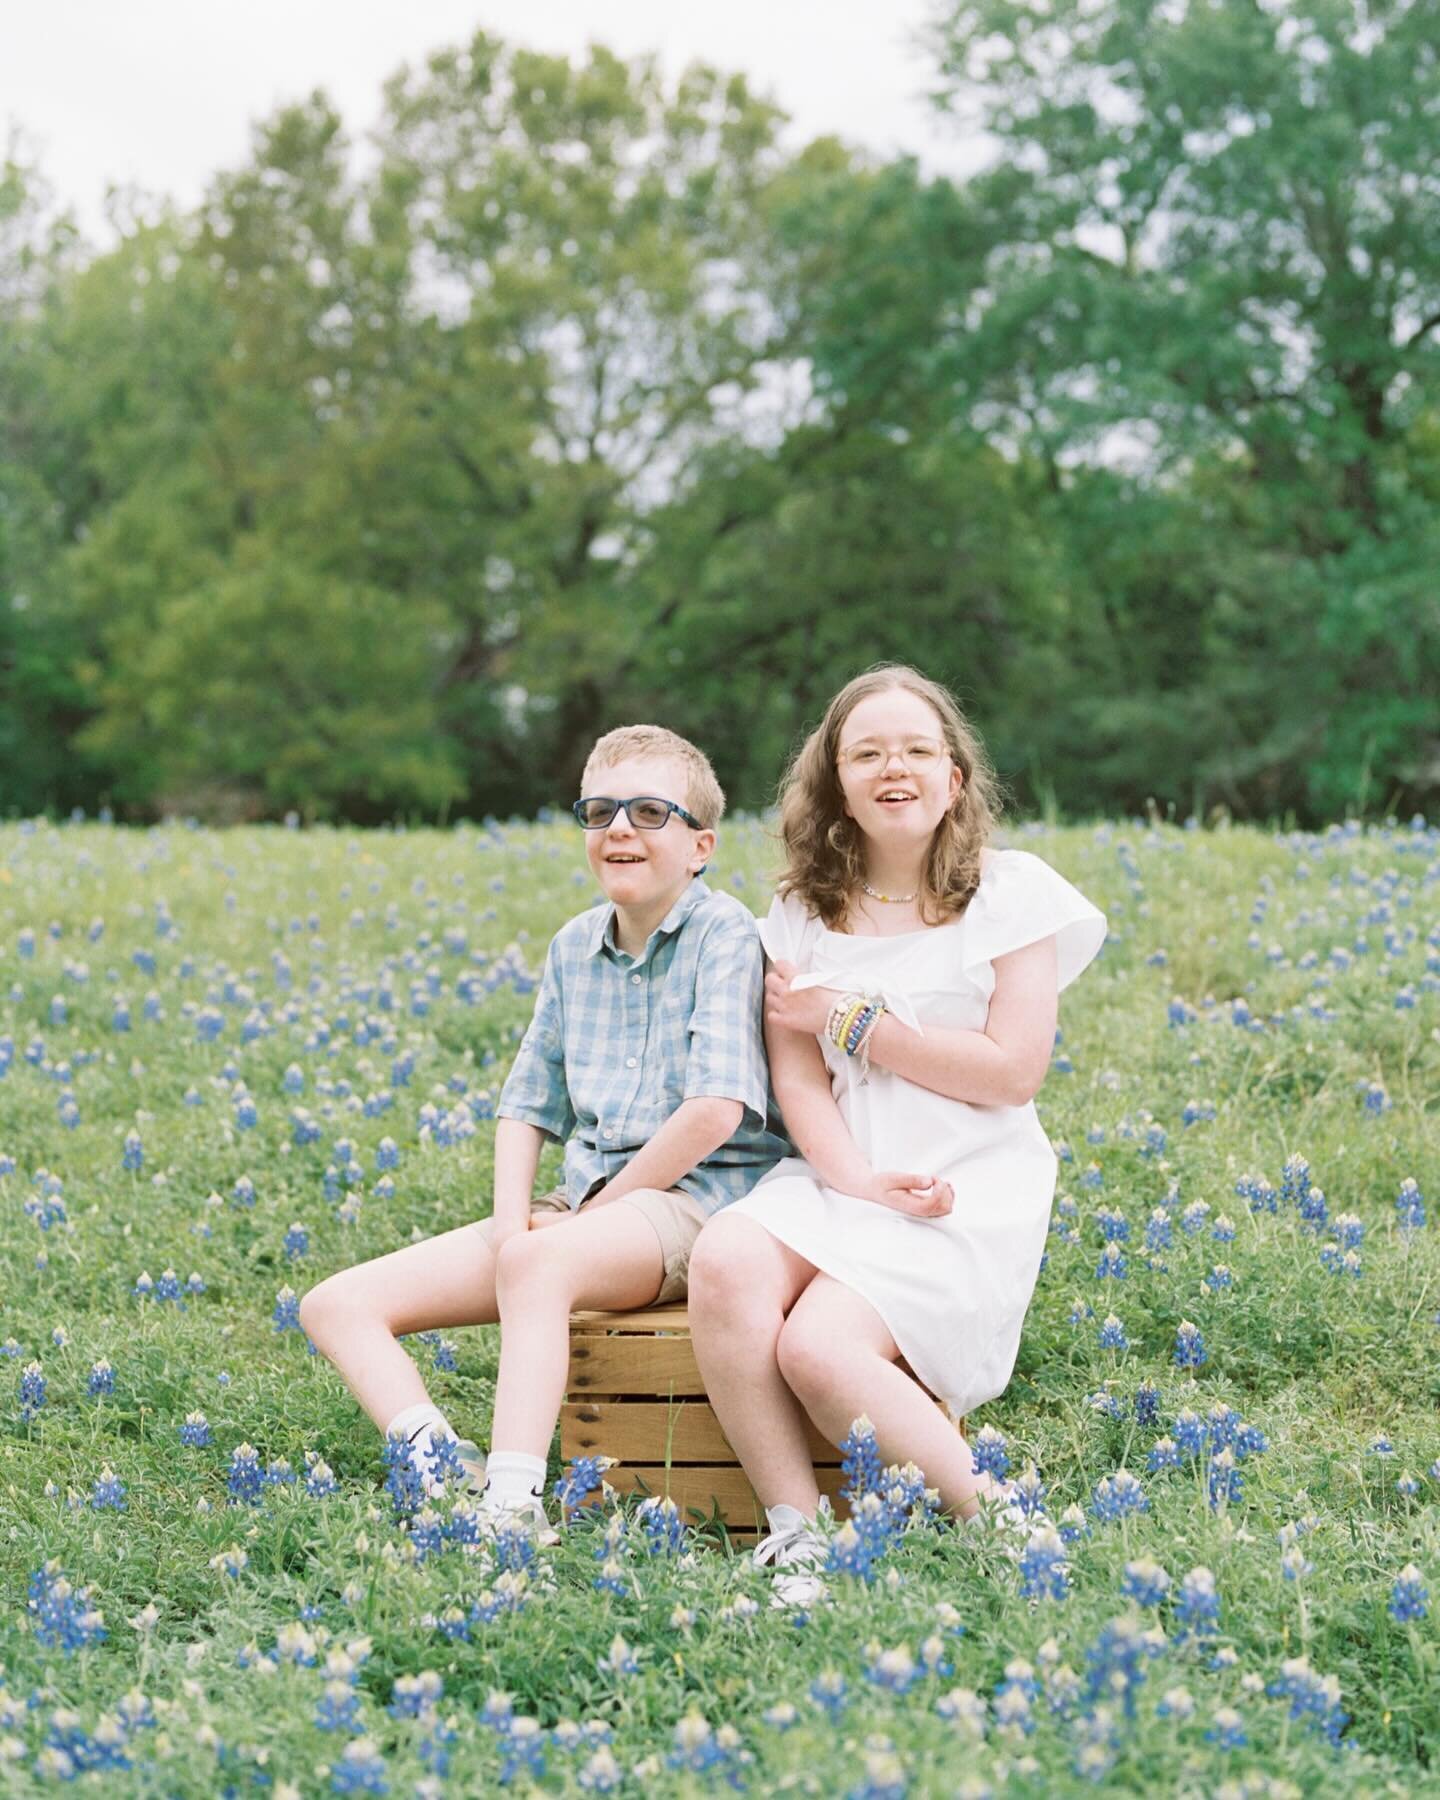 I am so obsessed with Bluebonnets. I take my kiddos every year I can and get Bluebonnet pics with them. I&rsquo;ll do it as long as I can no matter how old they are!!!! And aren&rsquo;t my kiddos precious!? I love them so much. I&rsquo;m so proud of 